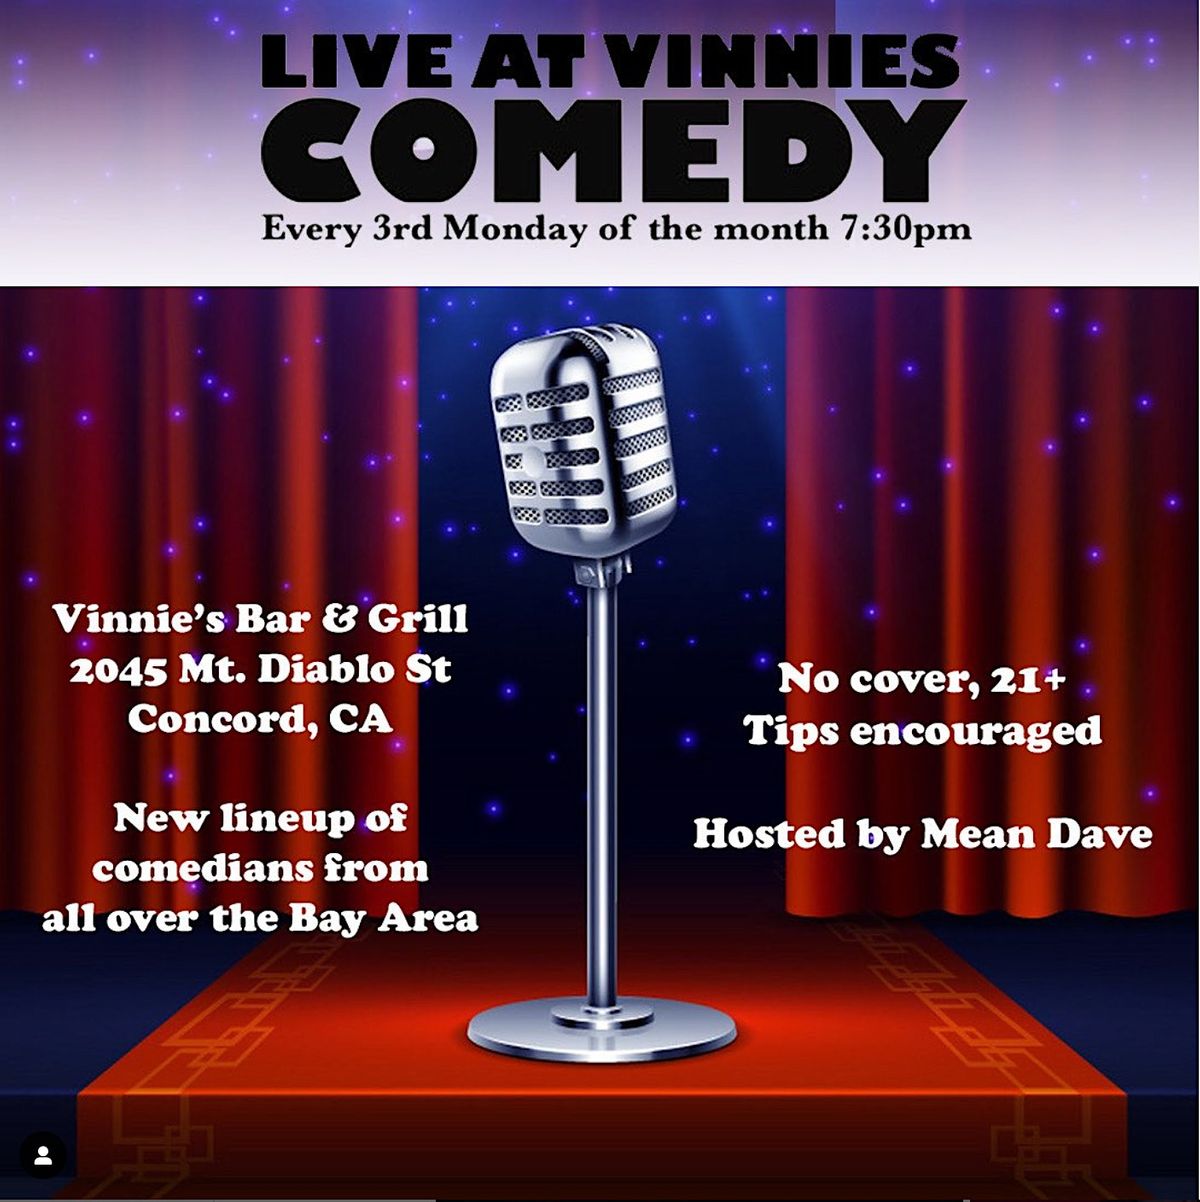 Comedy Night at Vinnie's Bar & Grill in Concord